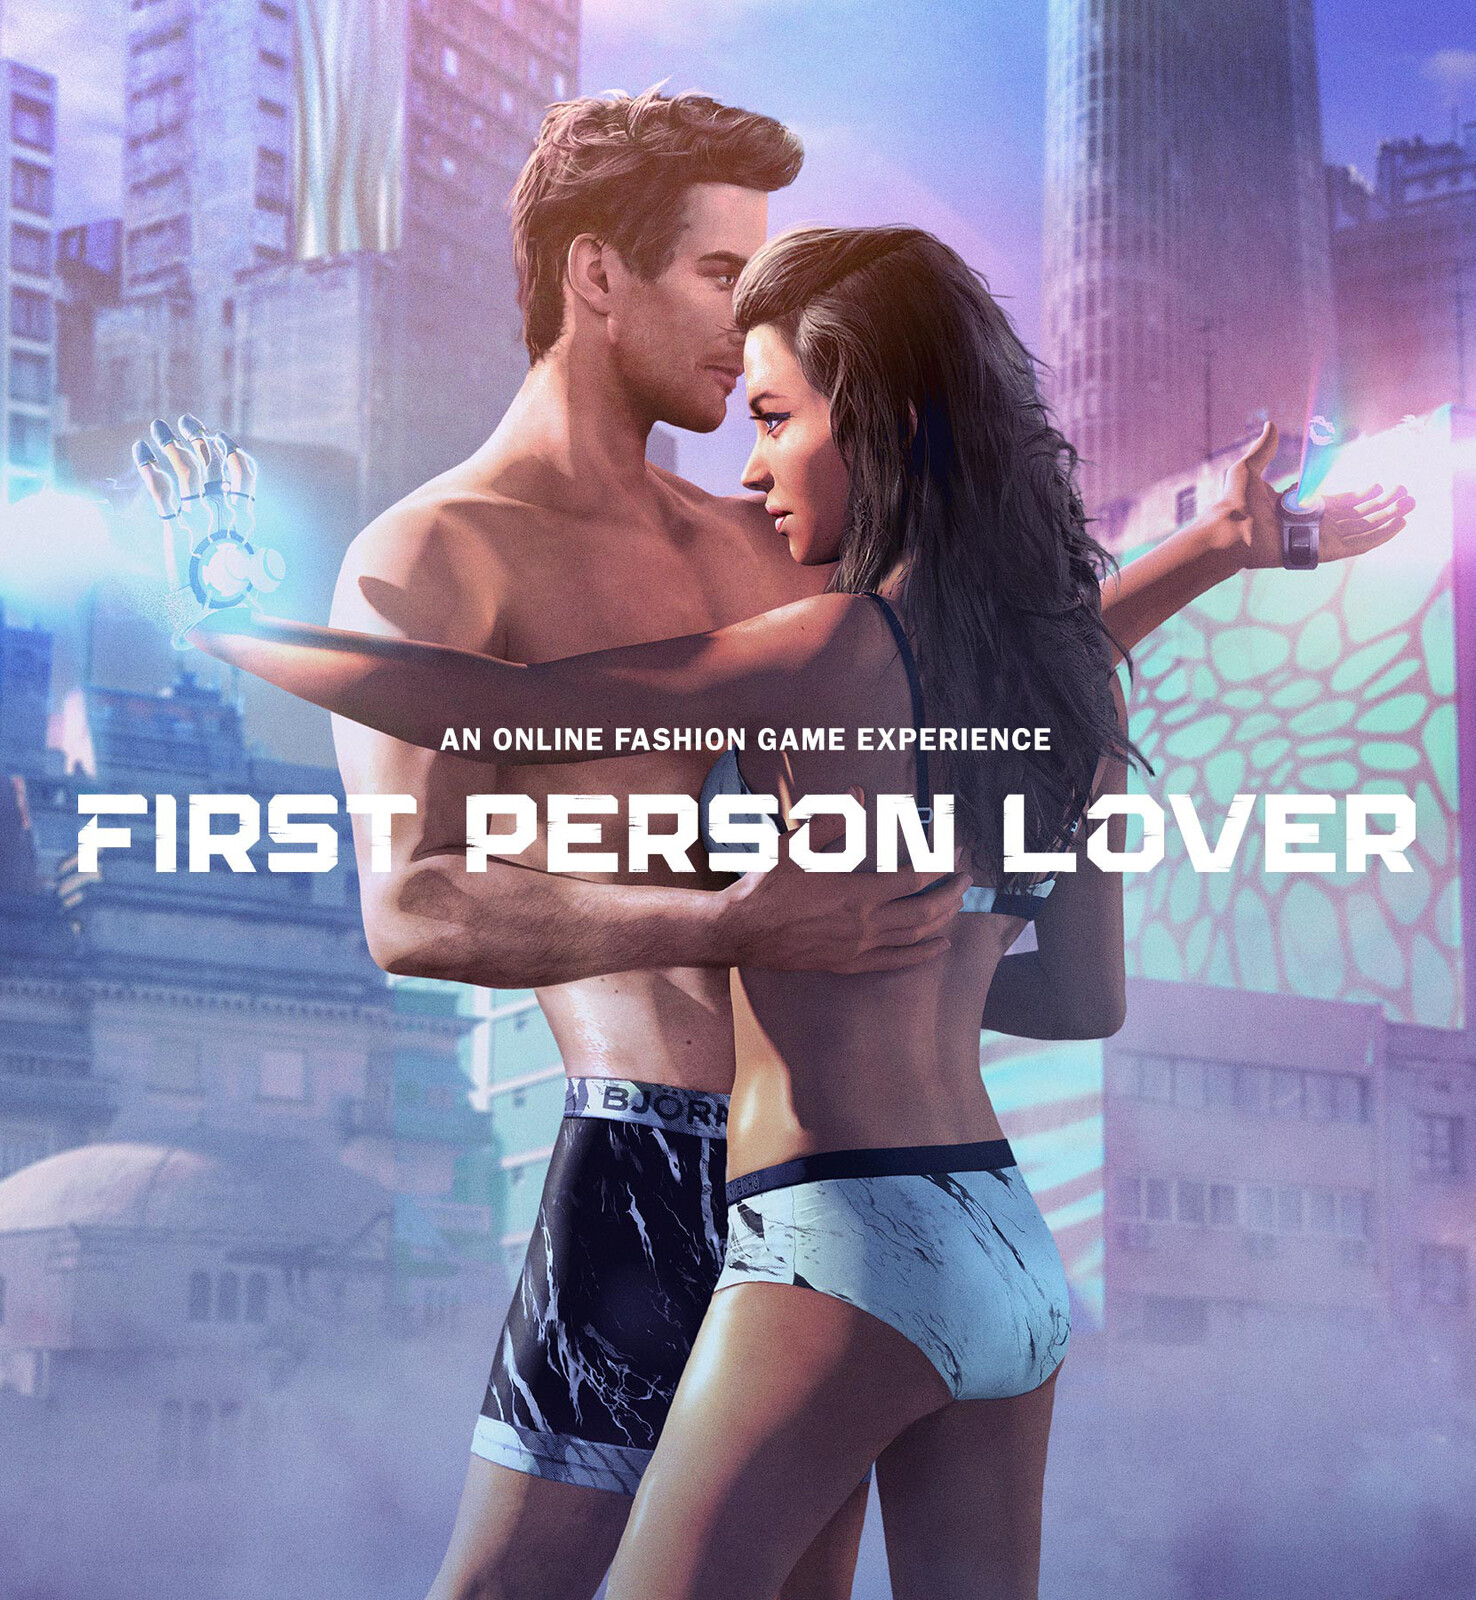 First Person Lover.